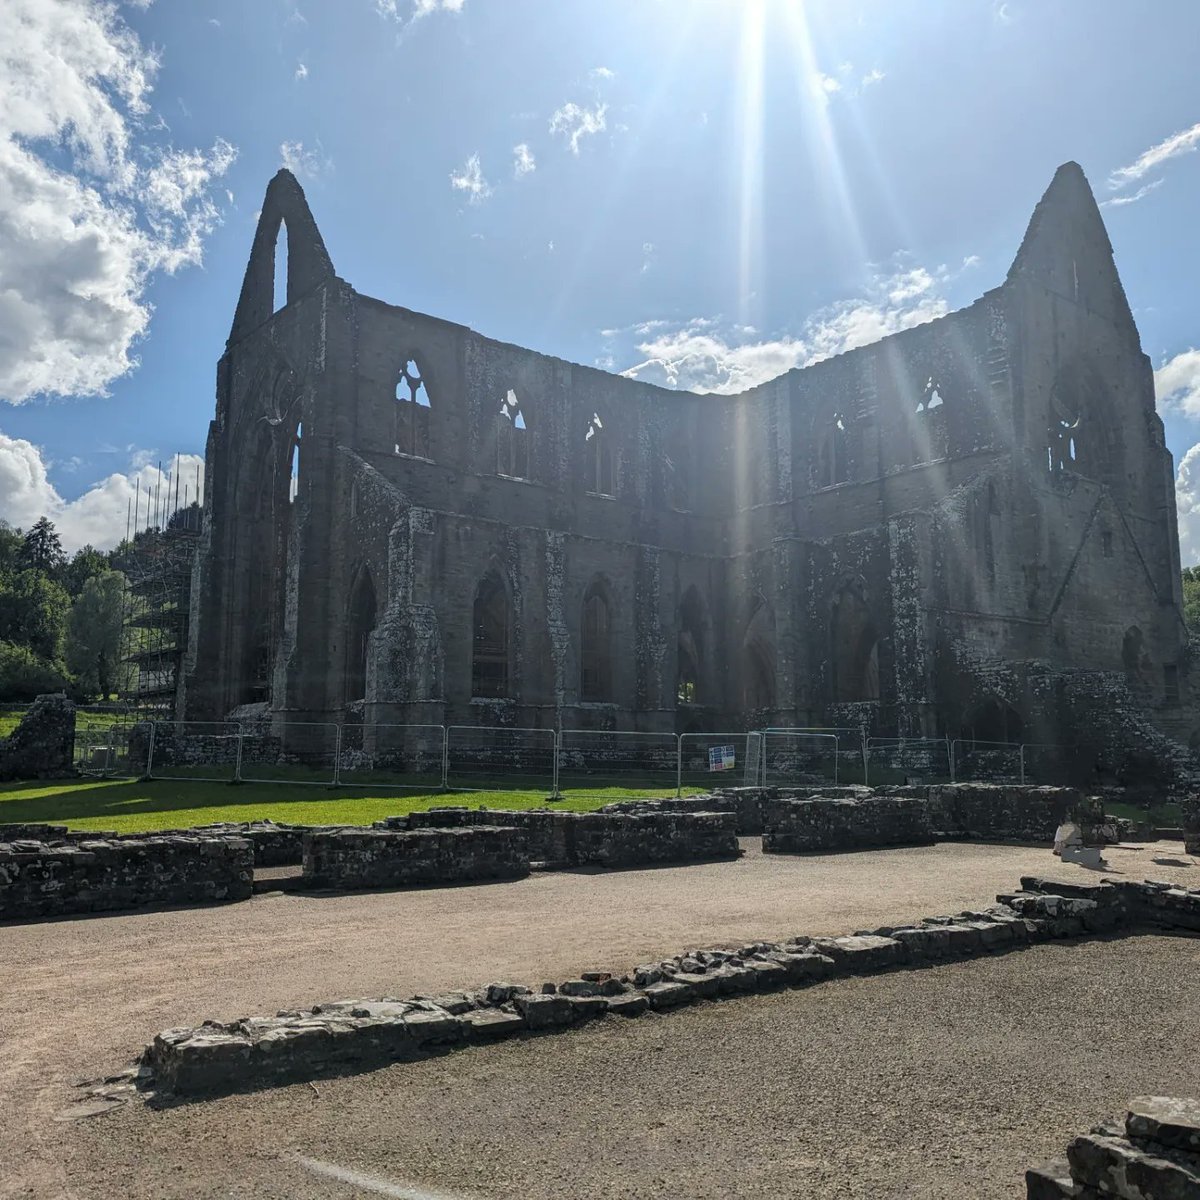 Day off today with the bf
I haven't been to Tintern in years so it brought back many memories & it was great to introduce my bf to it & it's giant (delicious) teacakes
Back to it tomorrow ready for @barry_collector_con this weekend

#dayout #dayoff #sightseeing #abbey #teacake